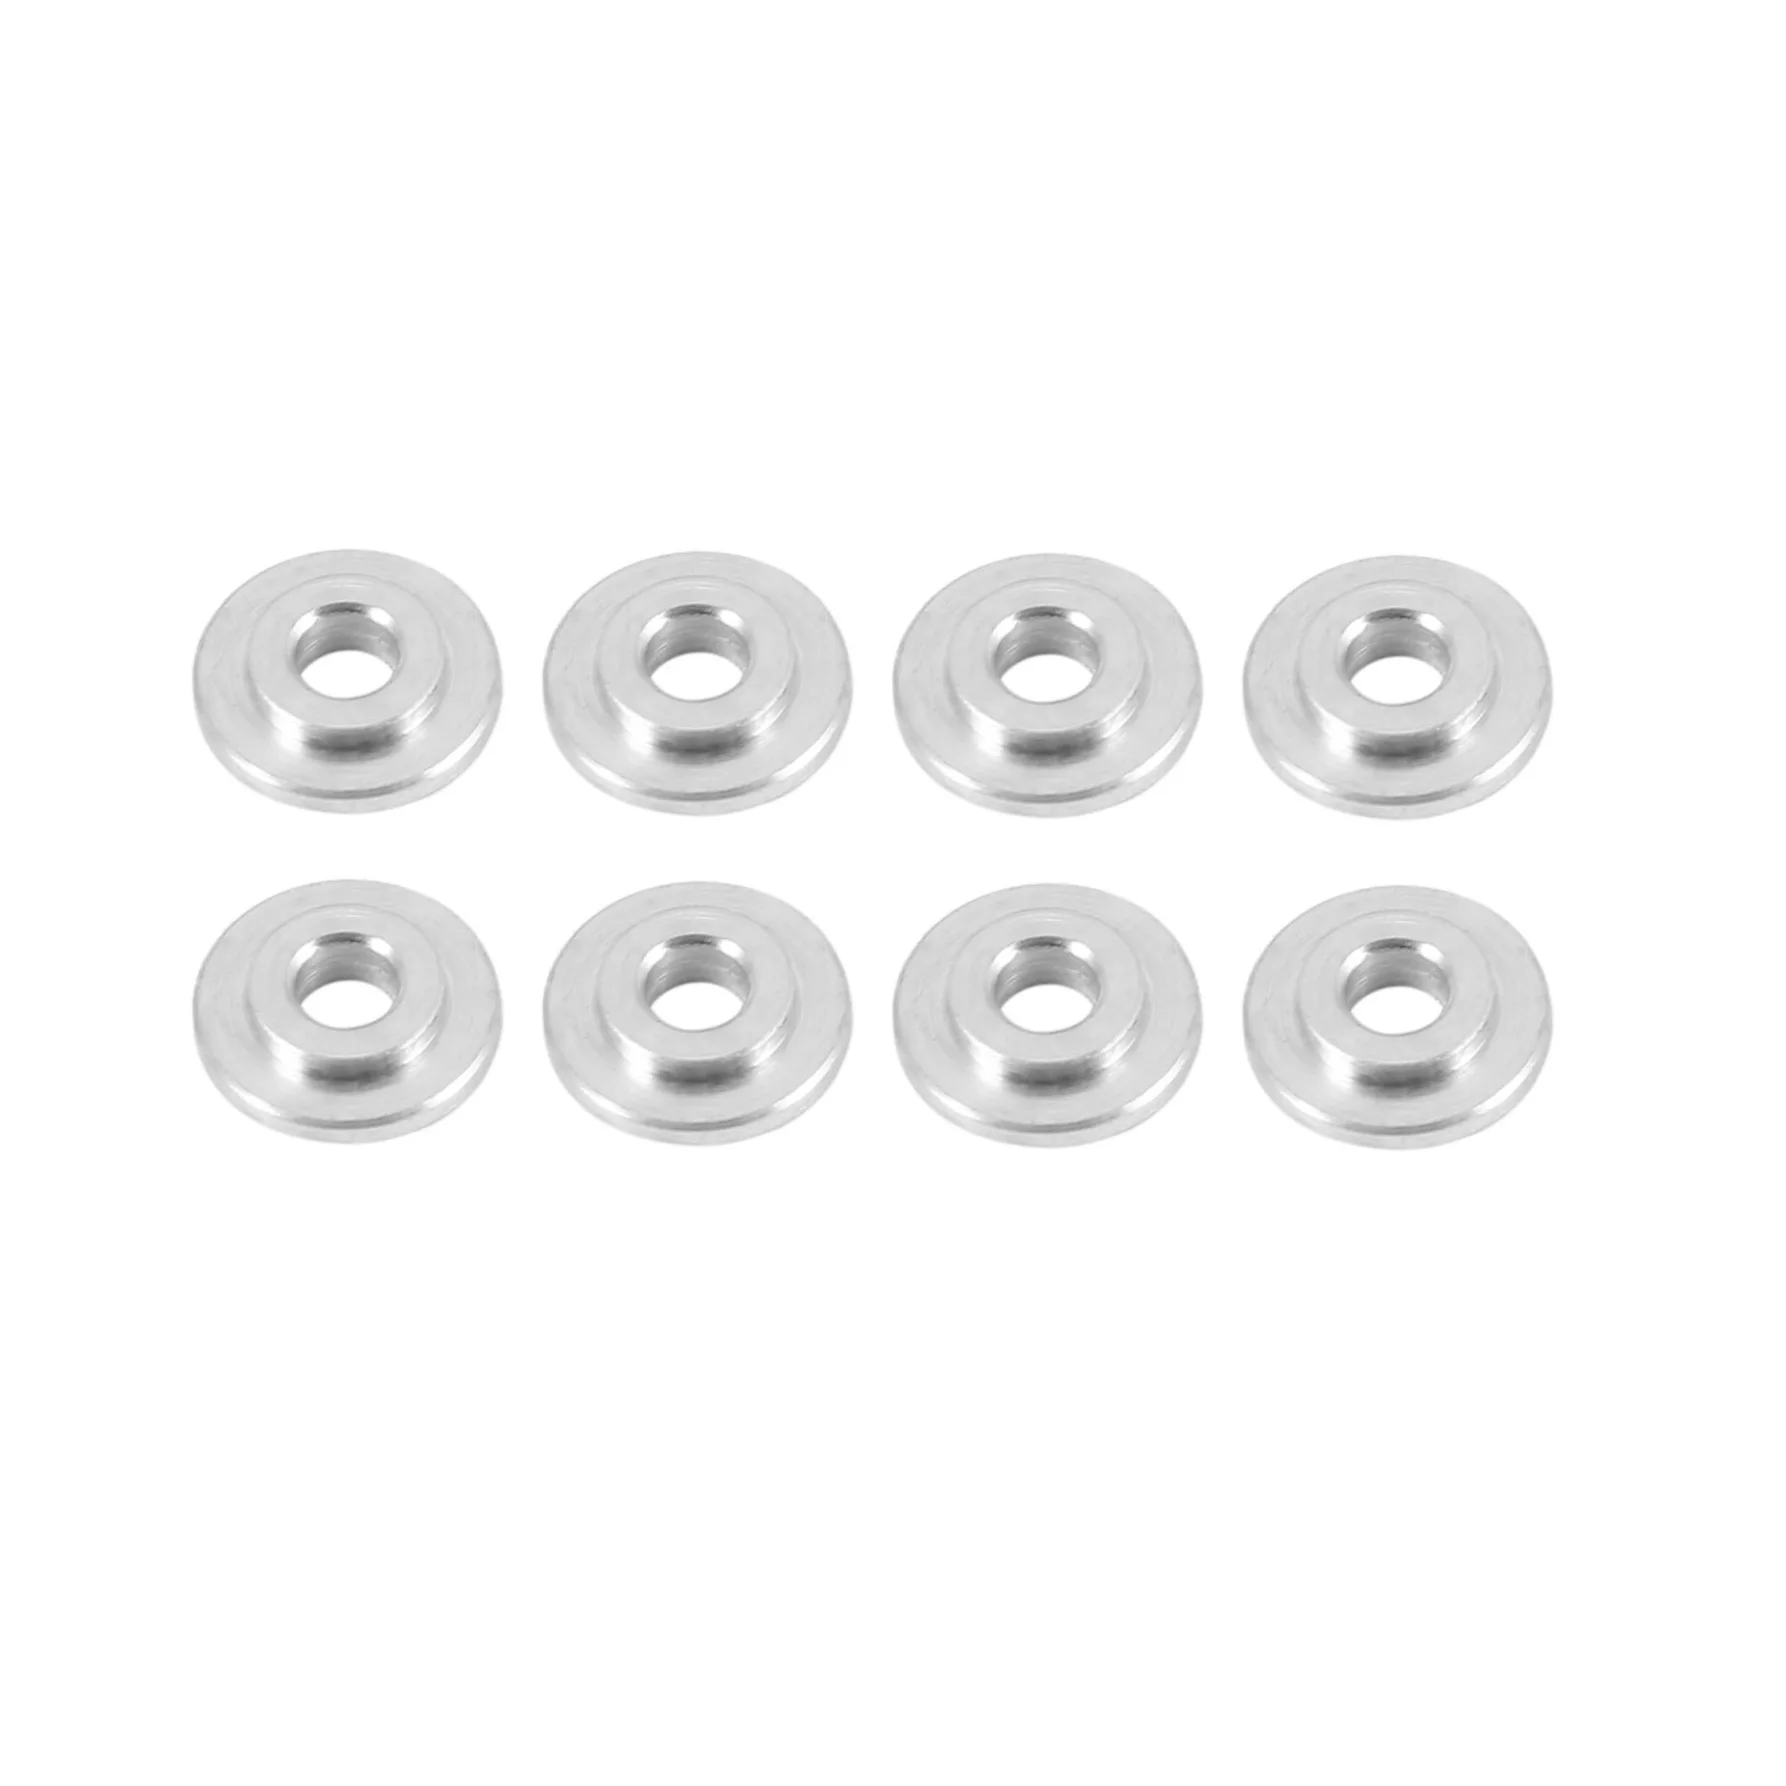 

8pcs Metal Screw Washers Bolts Gaskets for WPL C14 C24 B14 B24 B16 B36 MN D90 MN99S RC Car Upgrade Parts